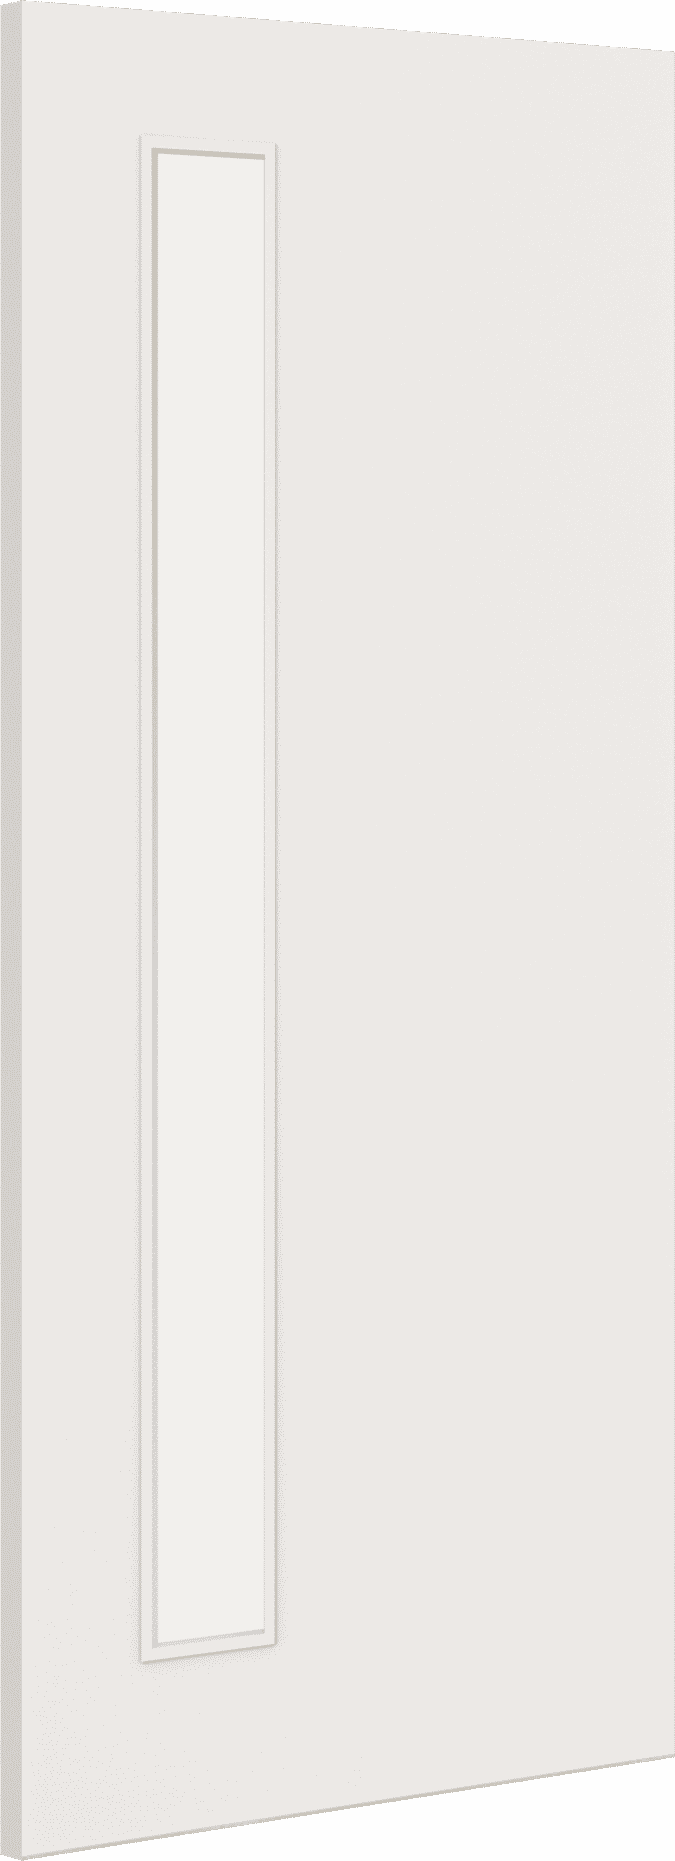 1981mm x 686mm x 44mm (27") Architectural Paint Grade White 06 Frosted Glazed Fire Door Blank